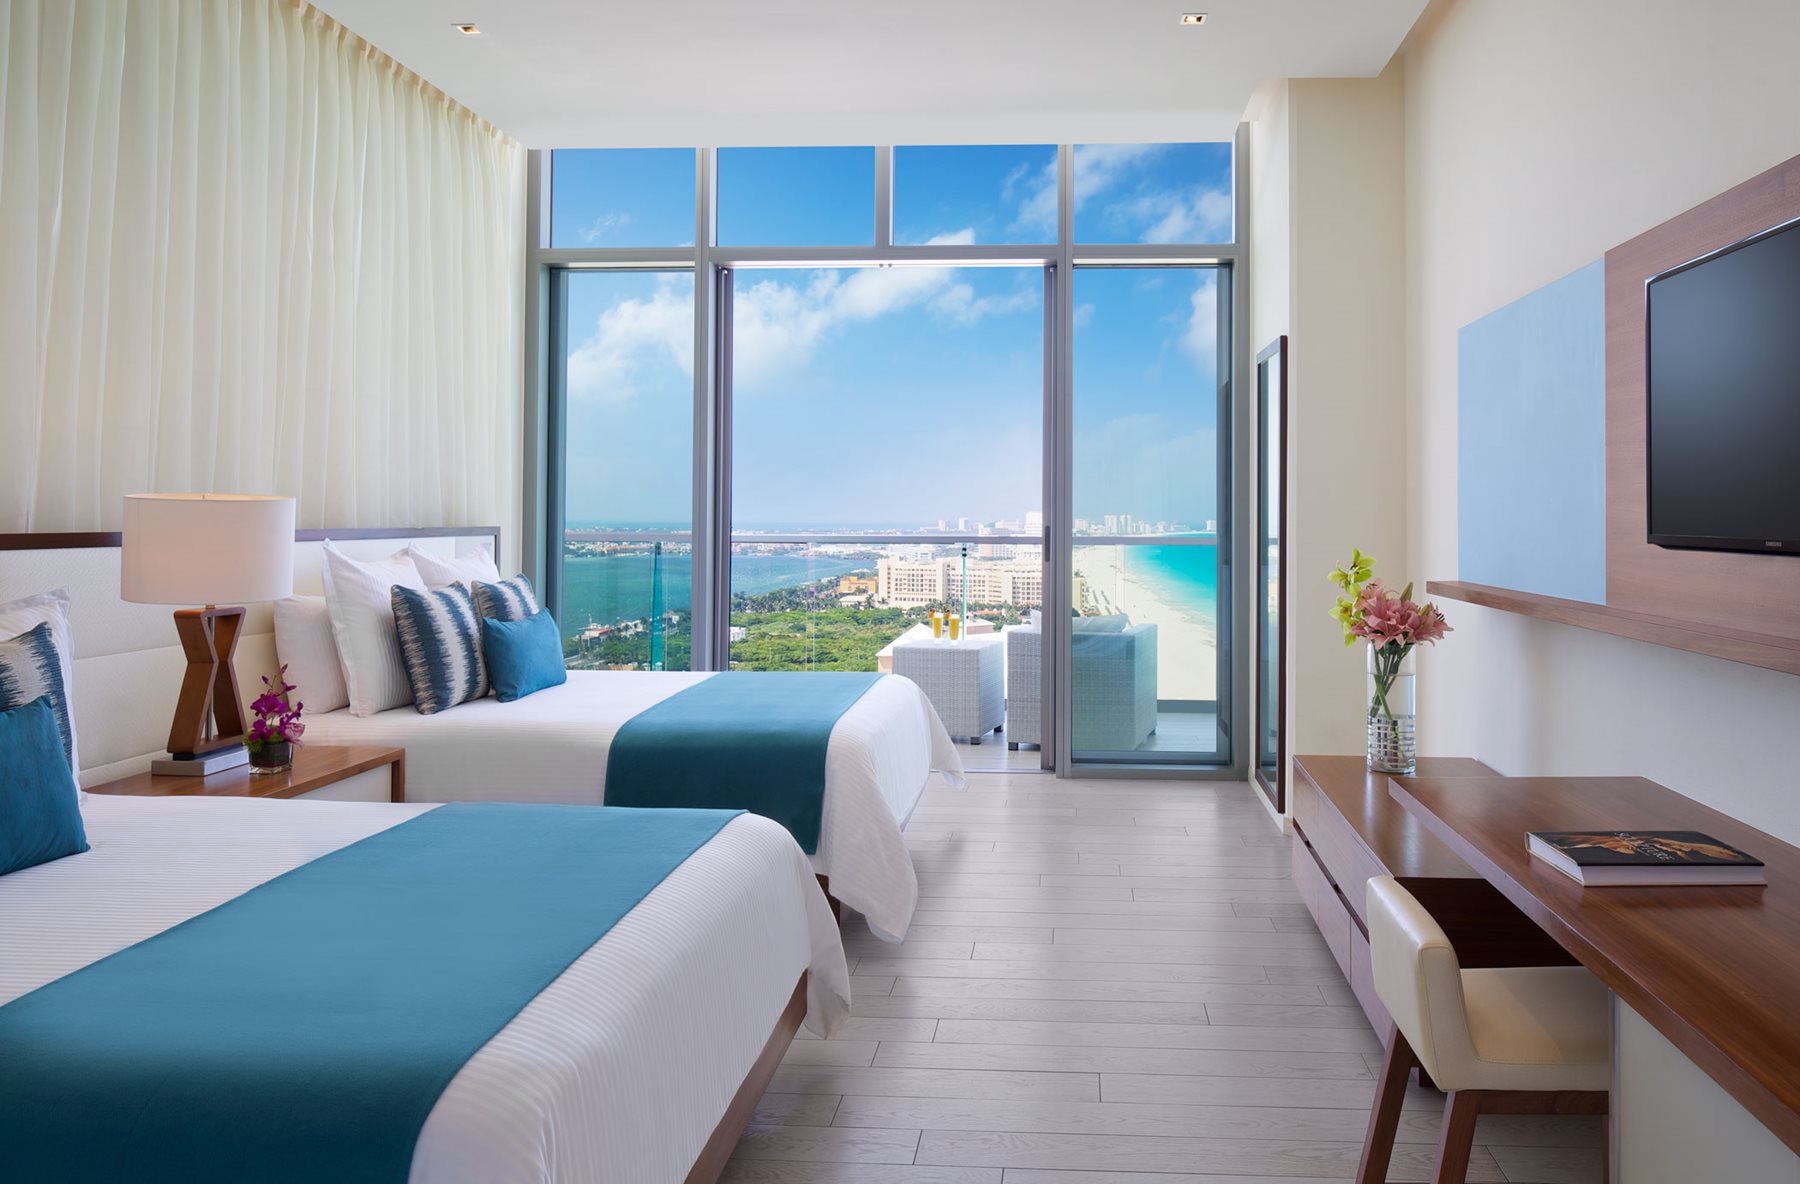 SMALL-CUN-Secrets-The-Vine-Room-Deluxe-Ocean-View-Double